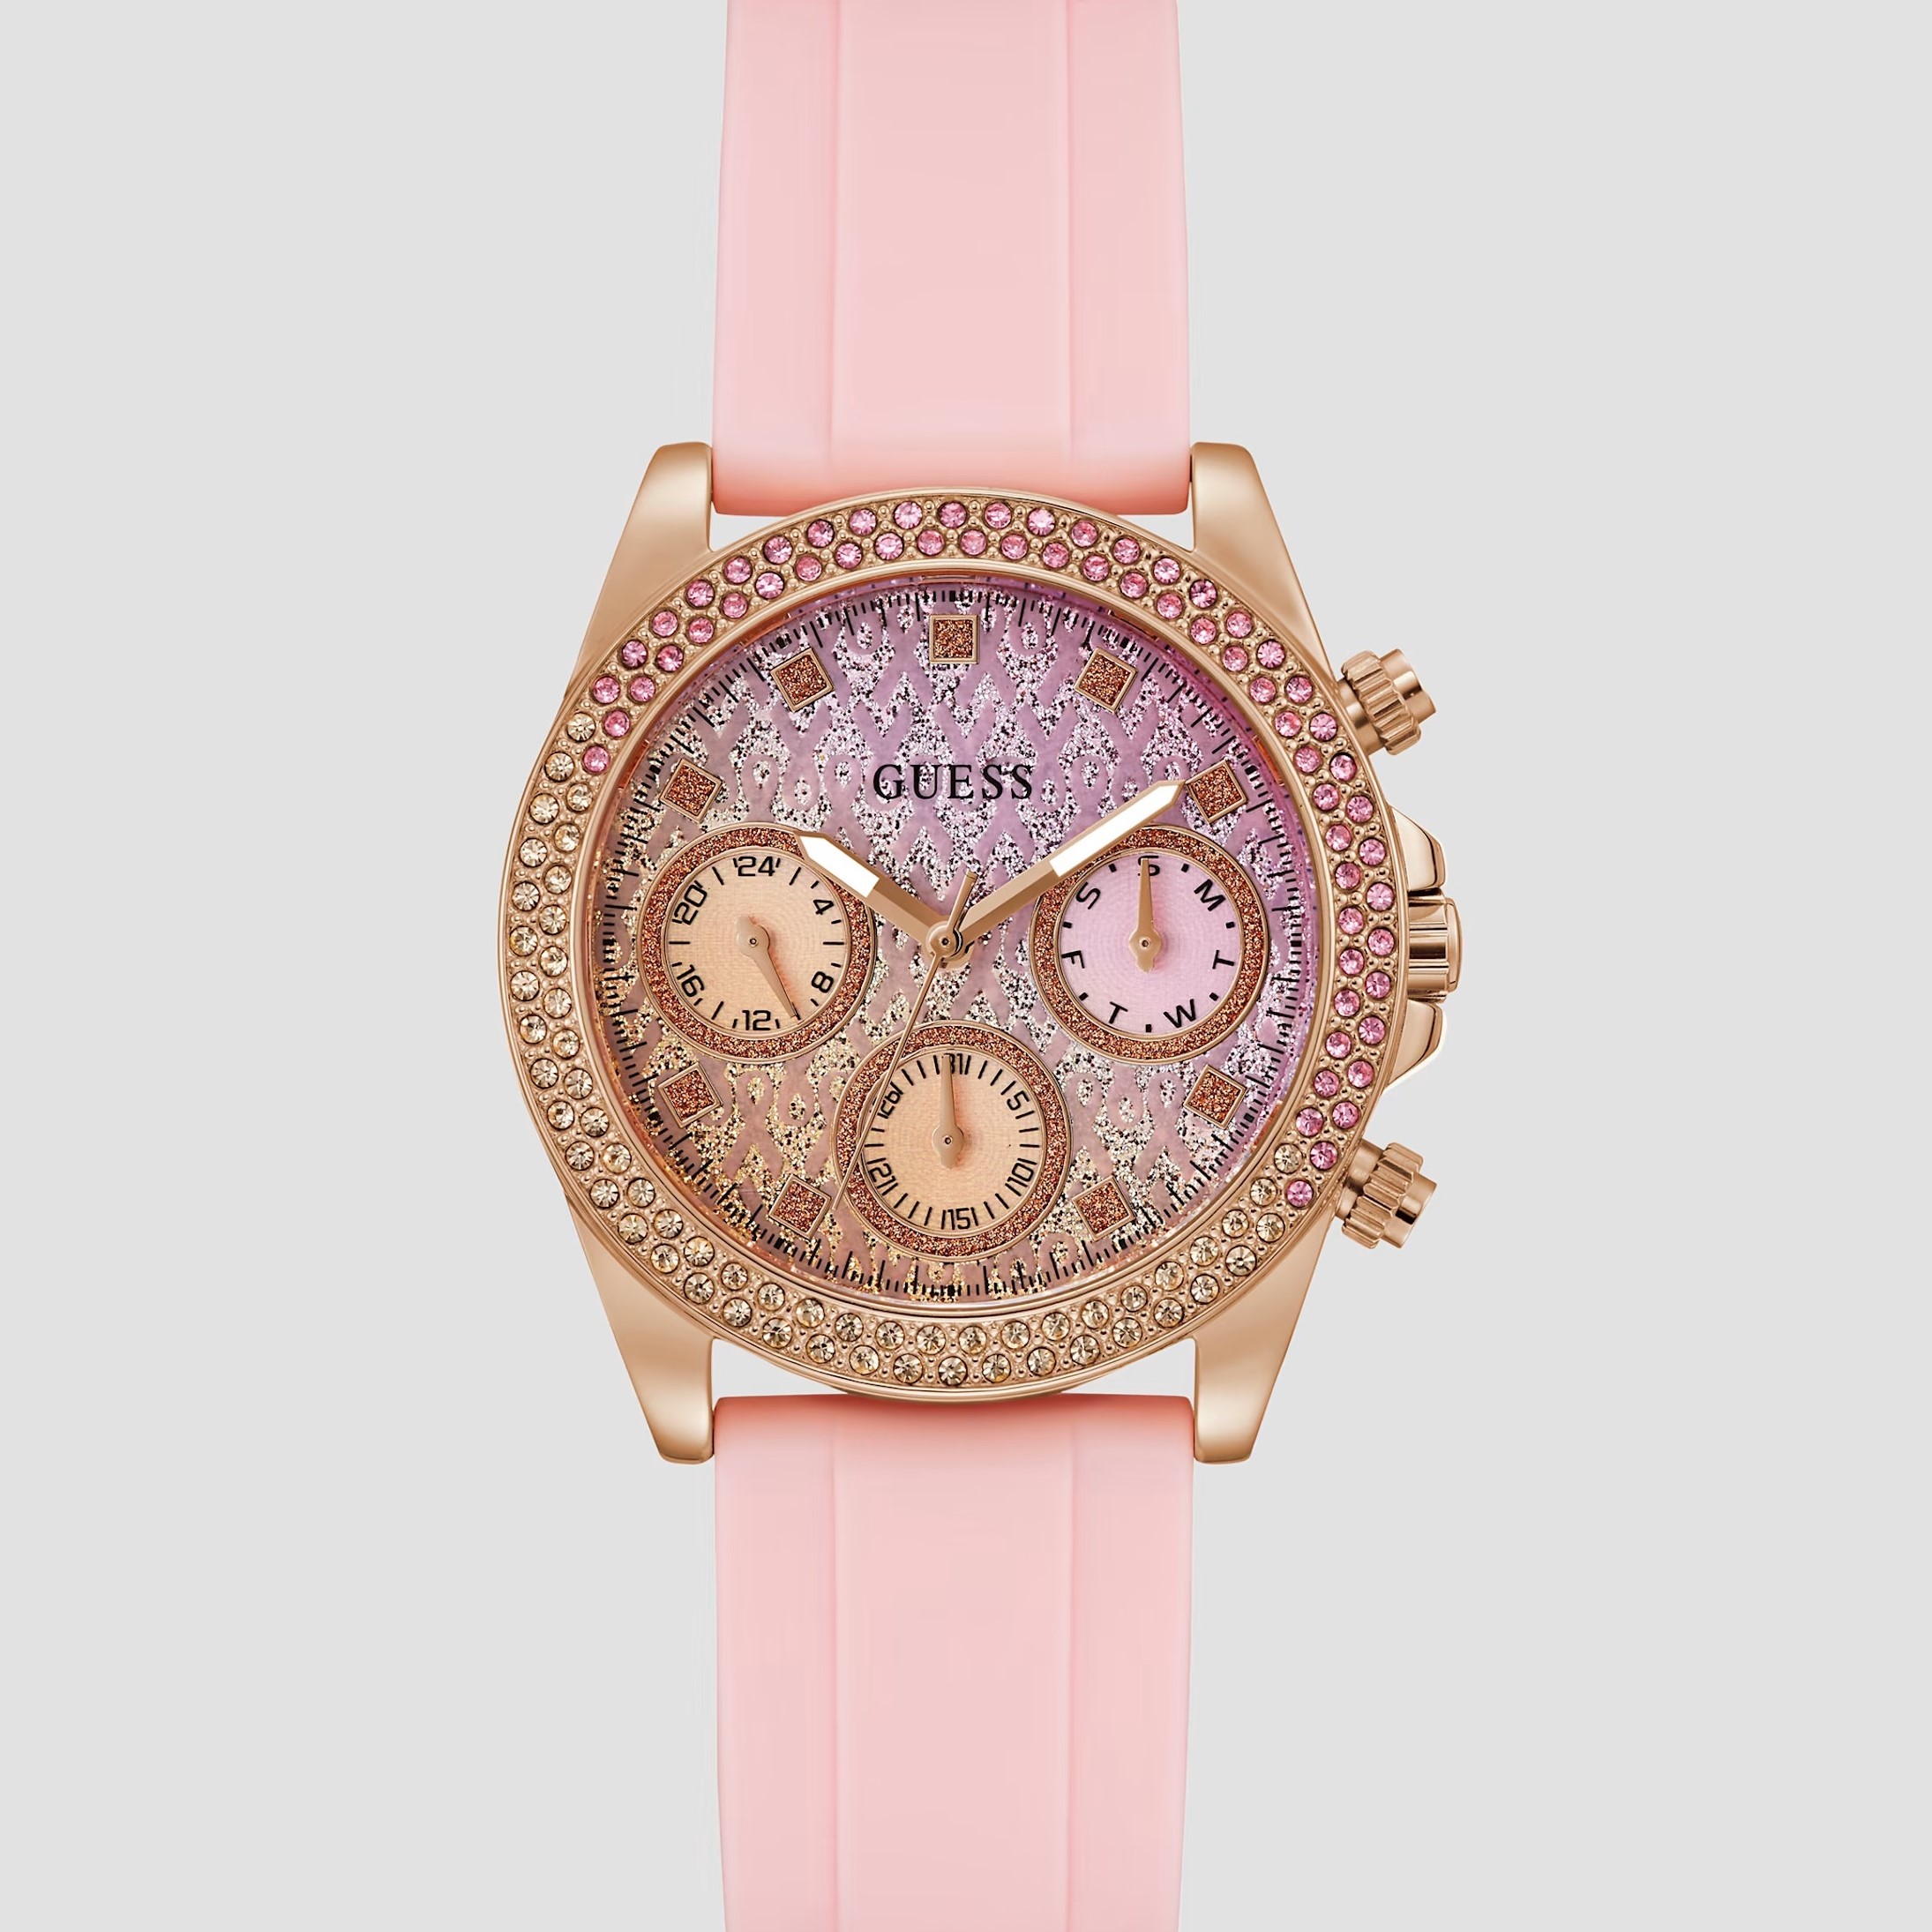 ĐỒNG HỒ NỮ GUESS LADIES SPARKLING PINK LIMITED EDITION WATCH GW0032L4 4